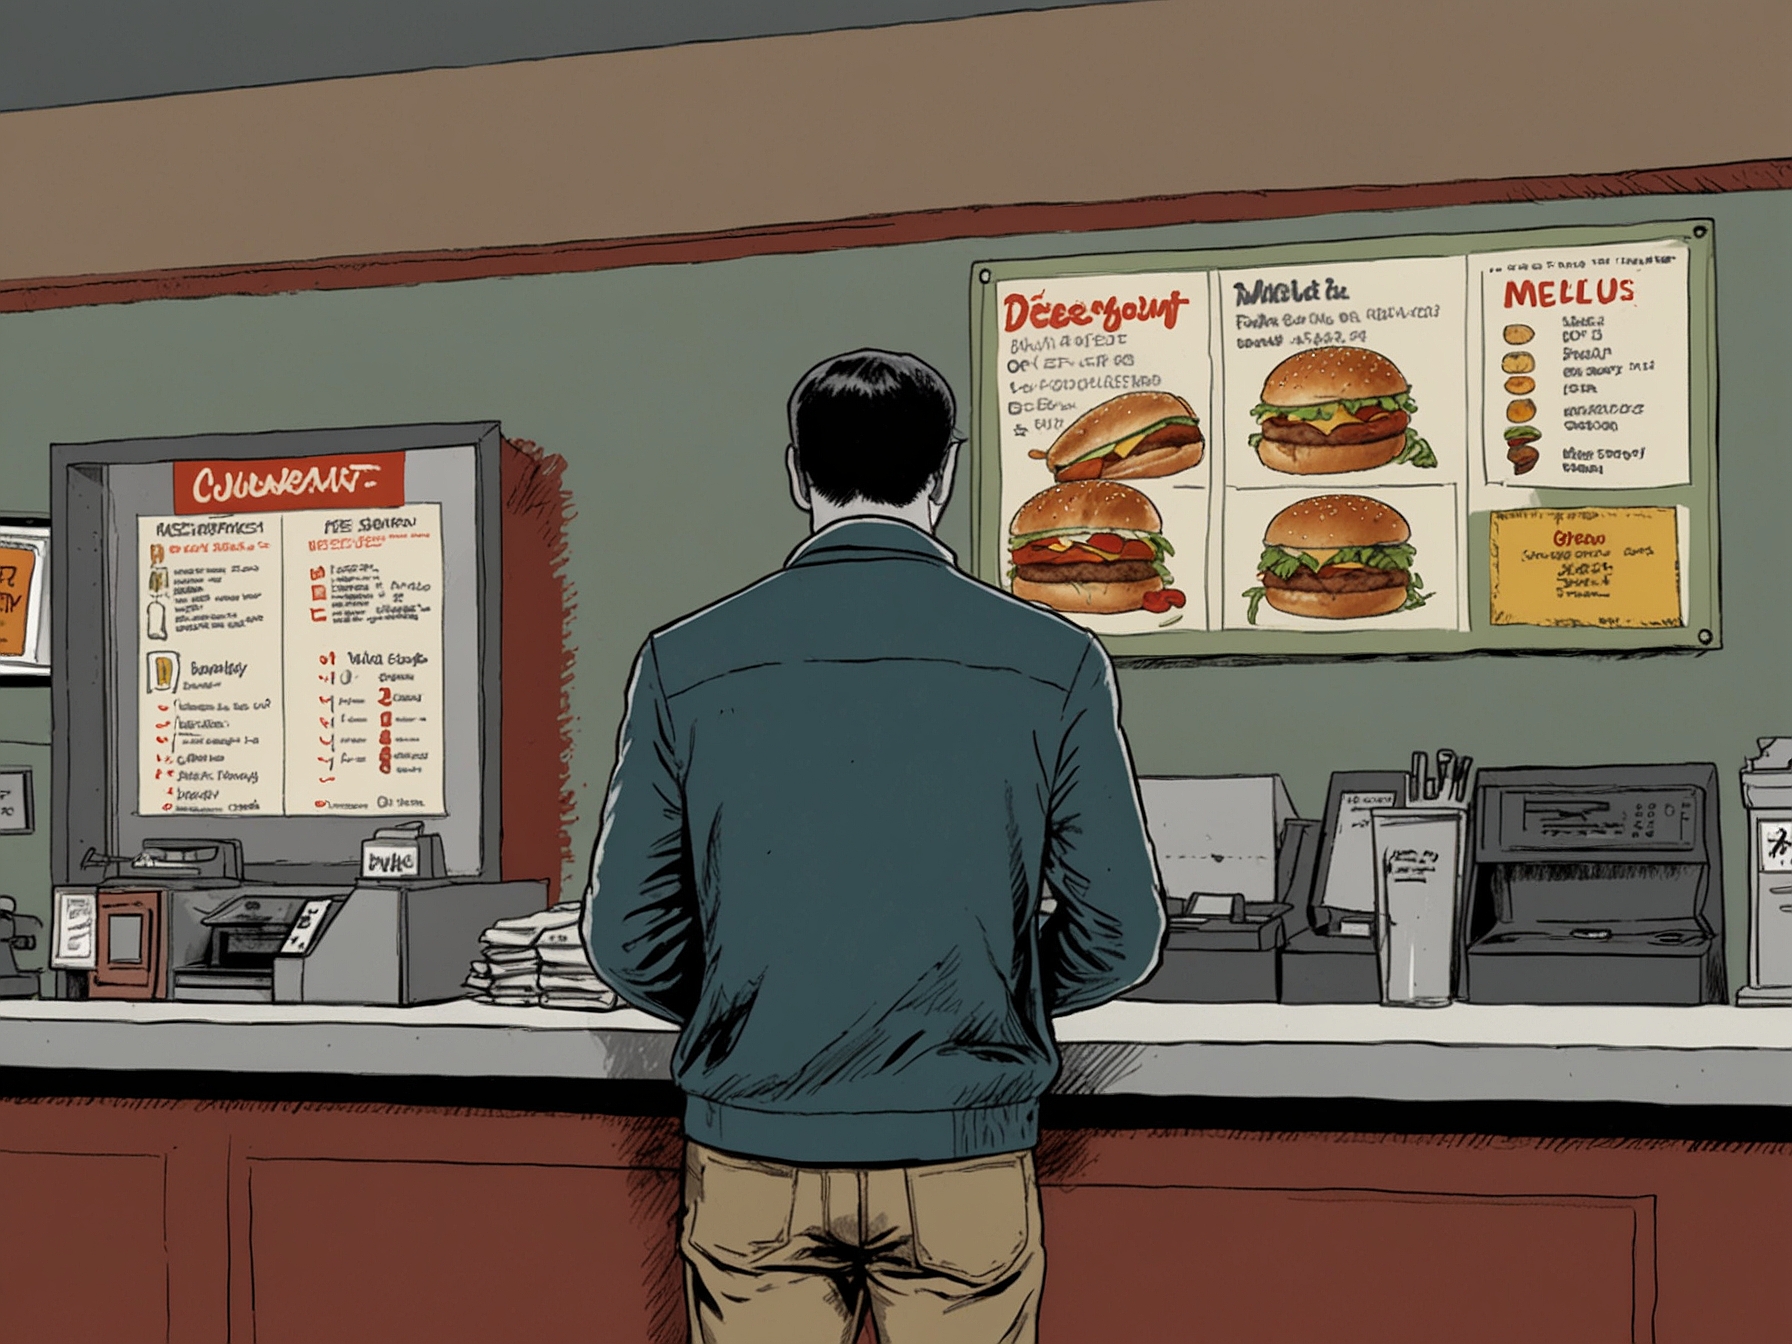 Image of a disappointed customer at a McDonald's counter looking at the menu, highlighting the underwhelming reception of the McPlant burger test.